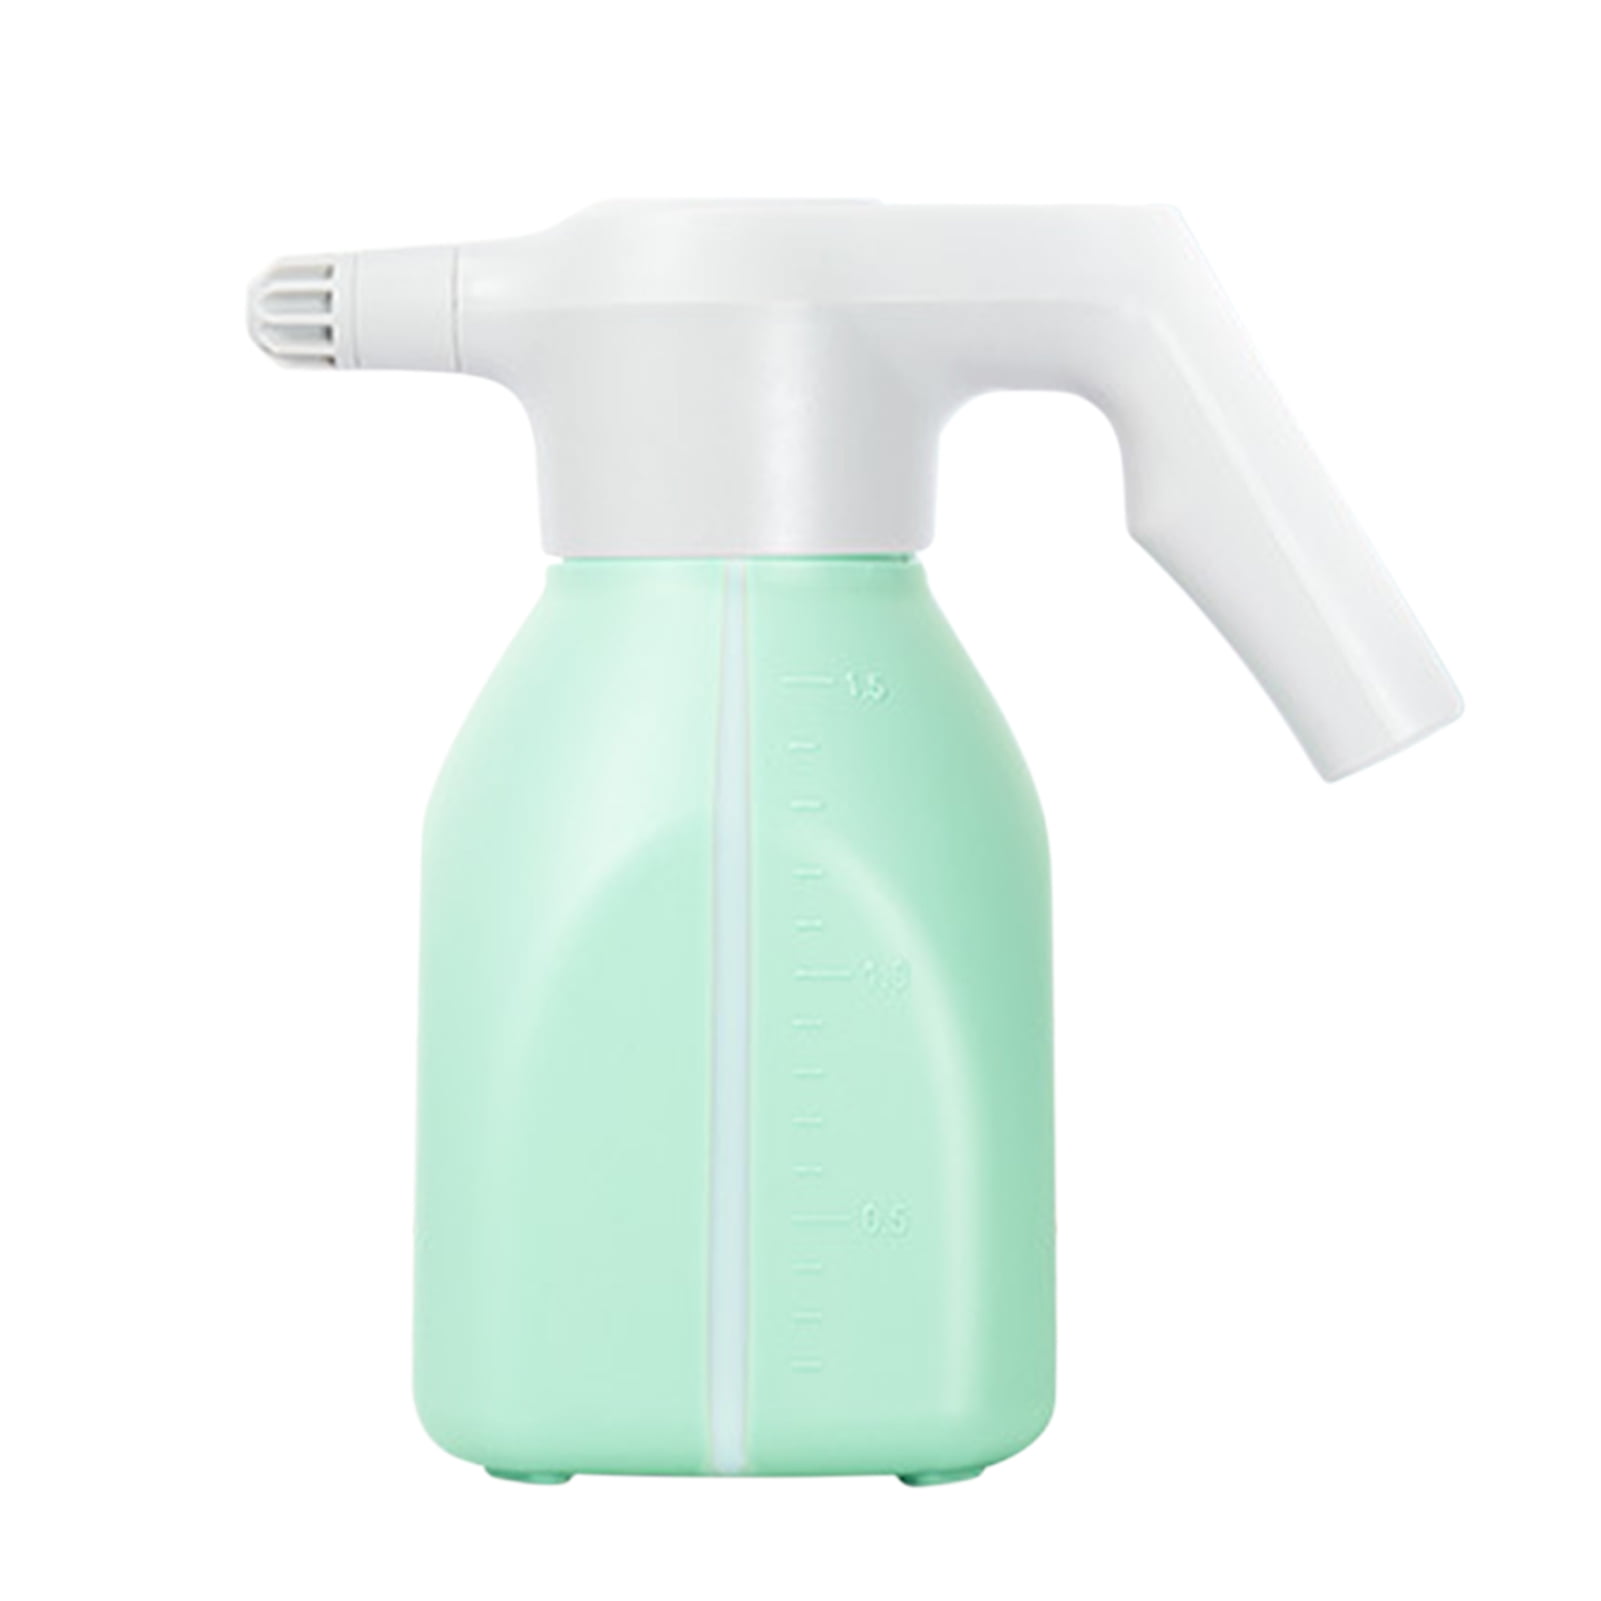 Details about  / 1.5L Household Flower Watering Pot Water Spray Can Hand Pressure Mist Sprayer